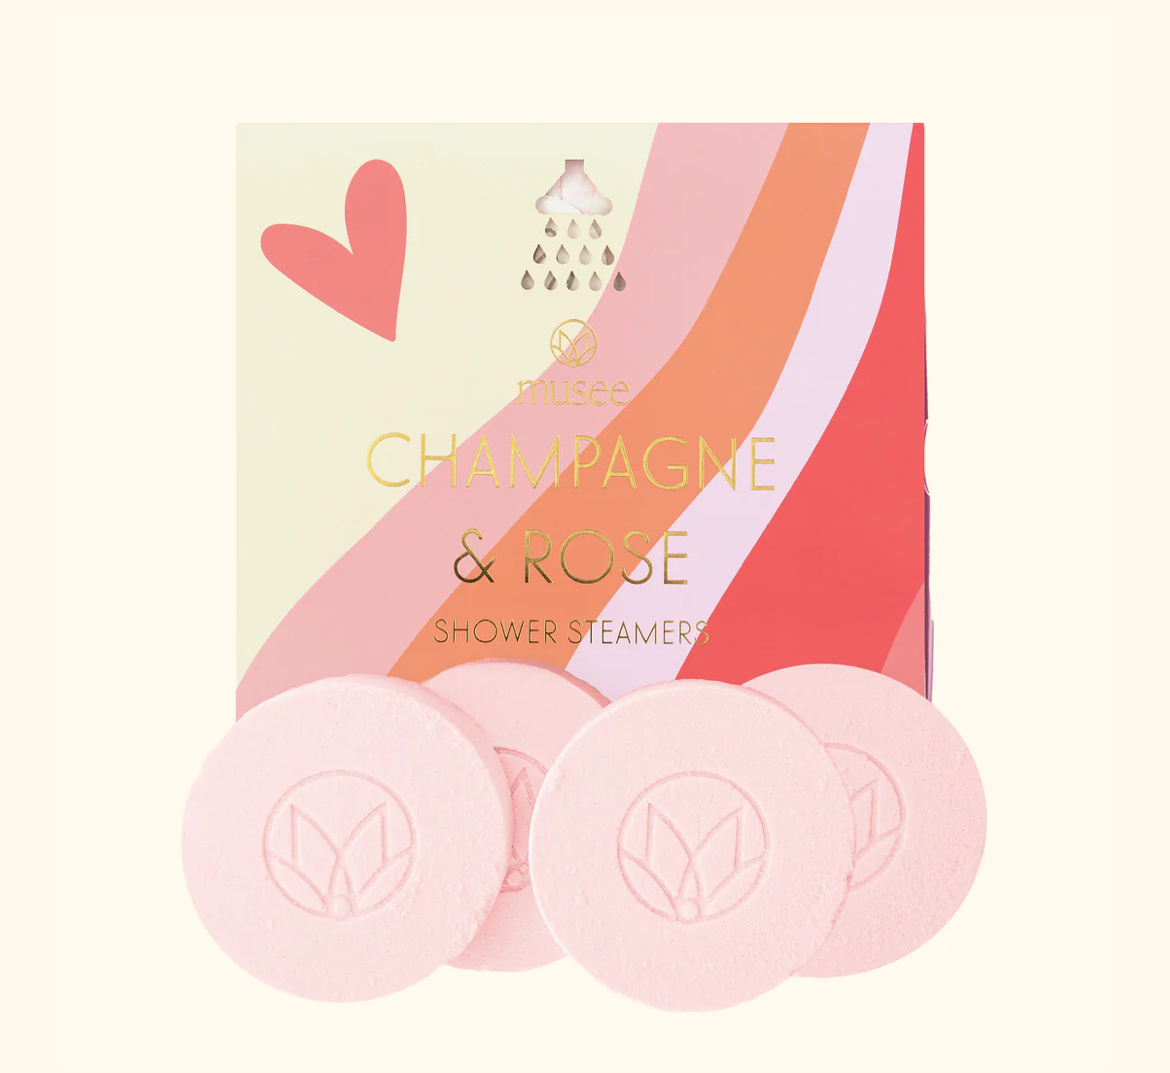 Musee Bath Champagne & Rose Shower Steamers